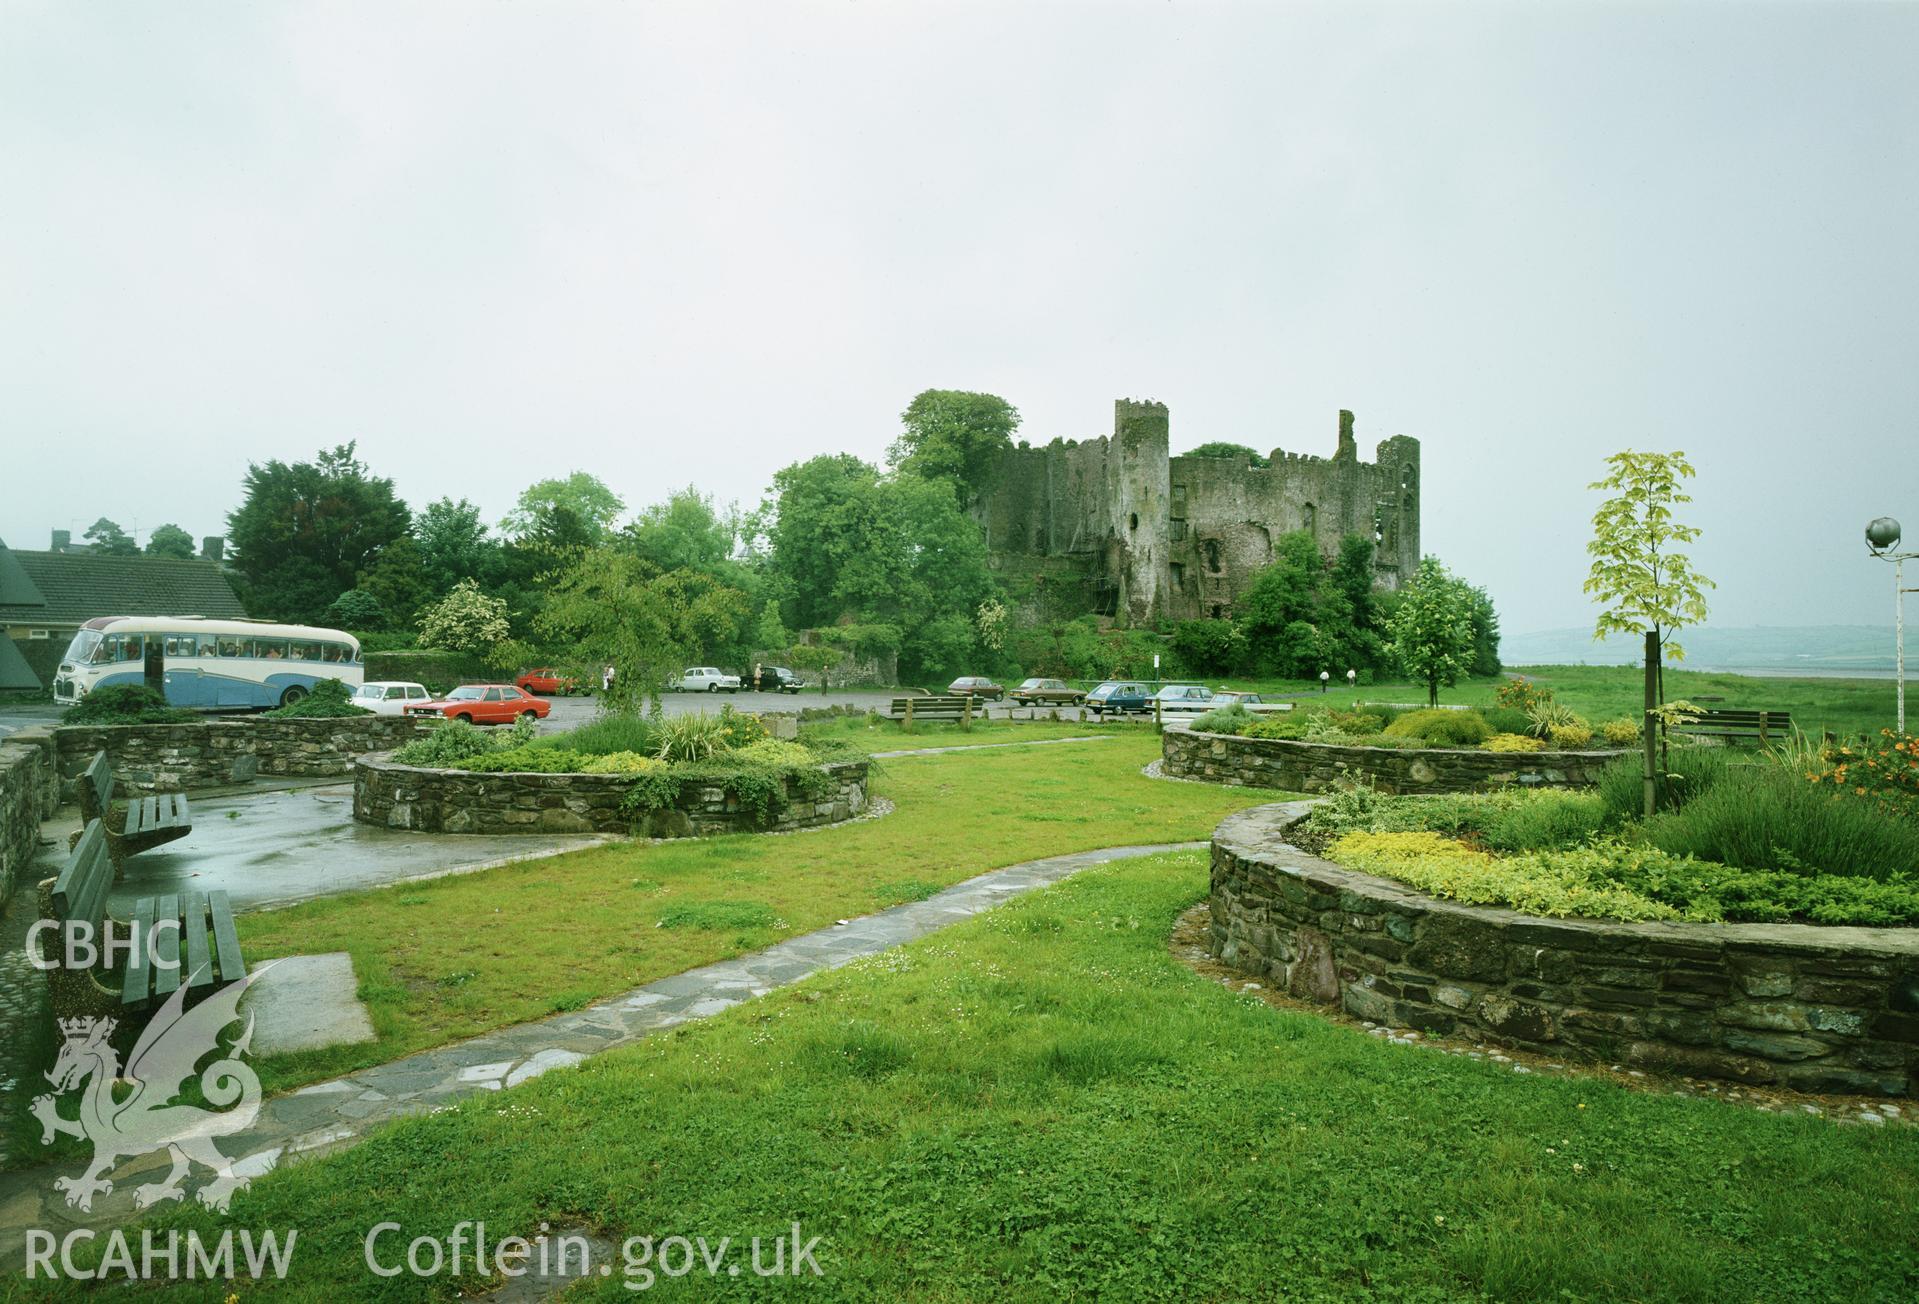 RCAHMW colour transparency of Laugharne Castle, taken by Iain Wright, 1979